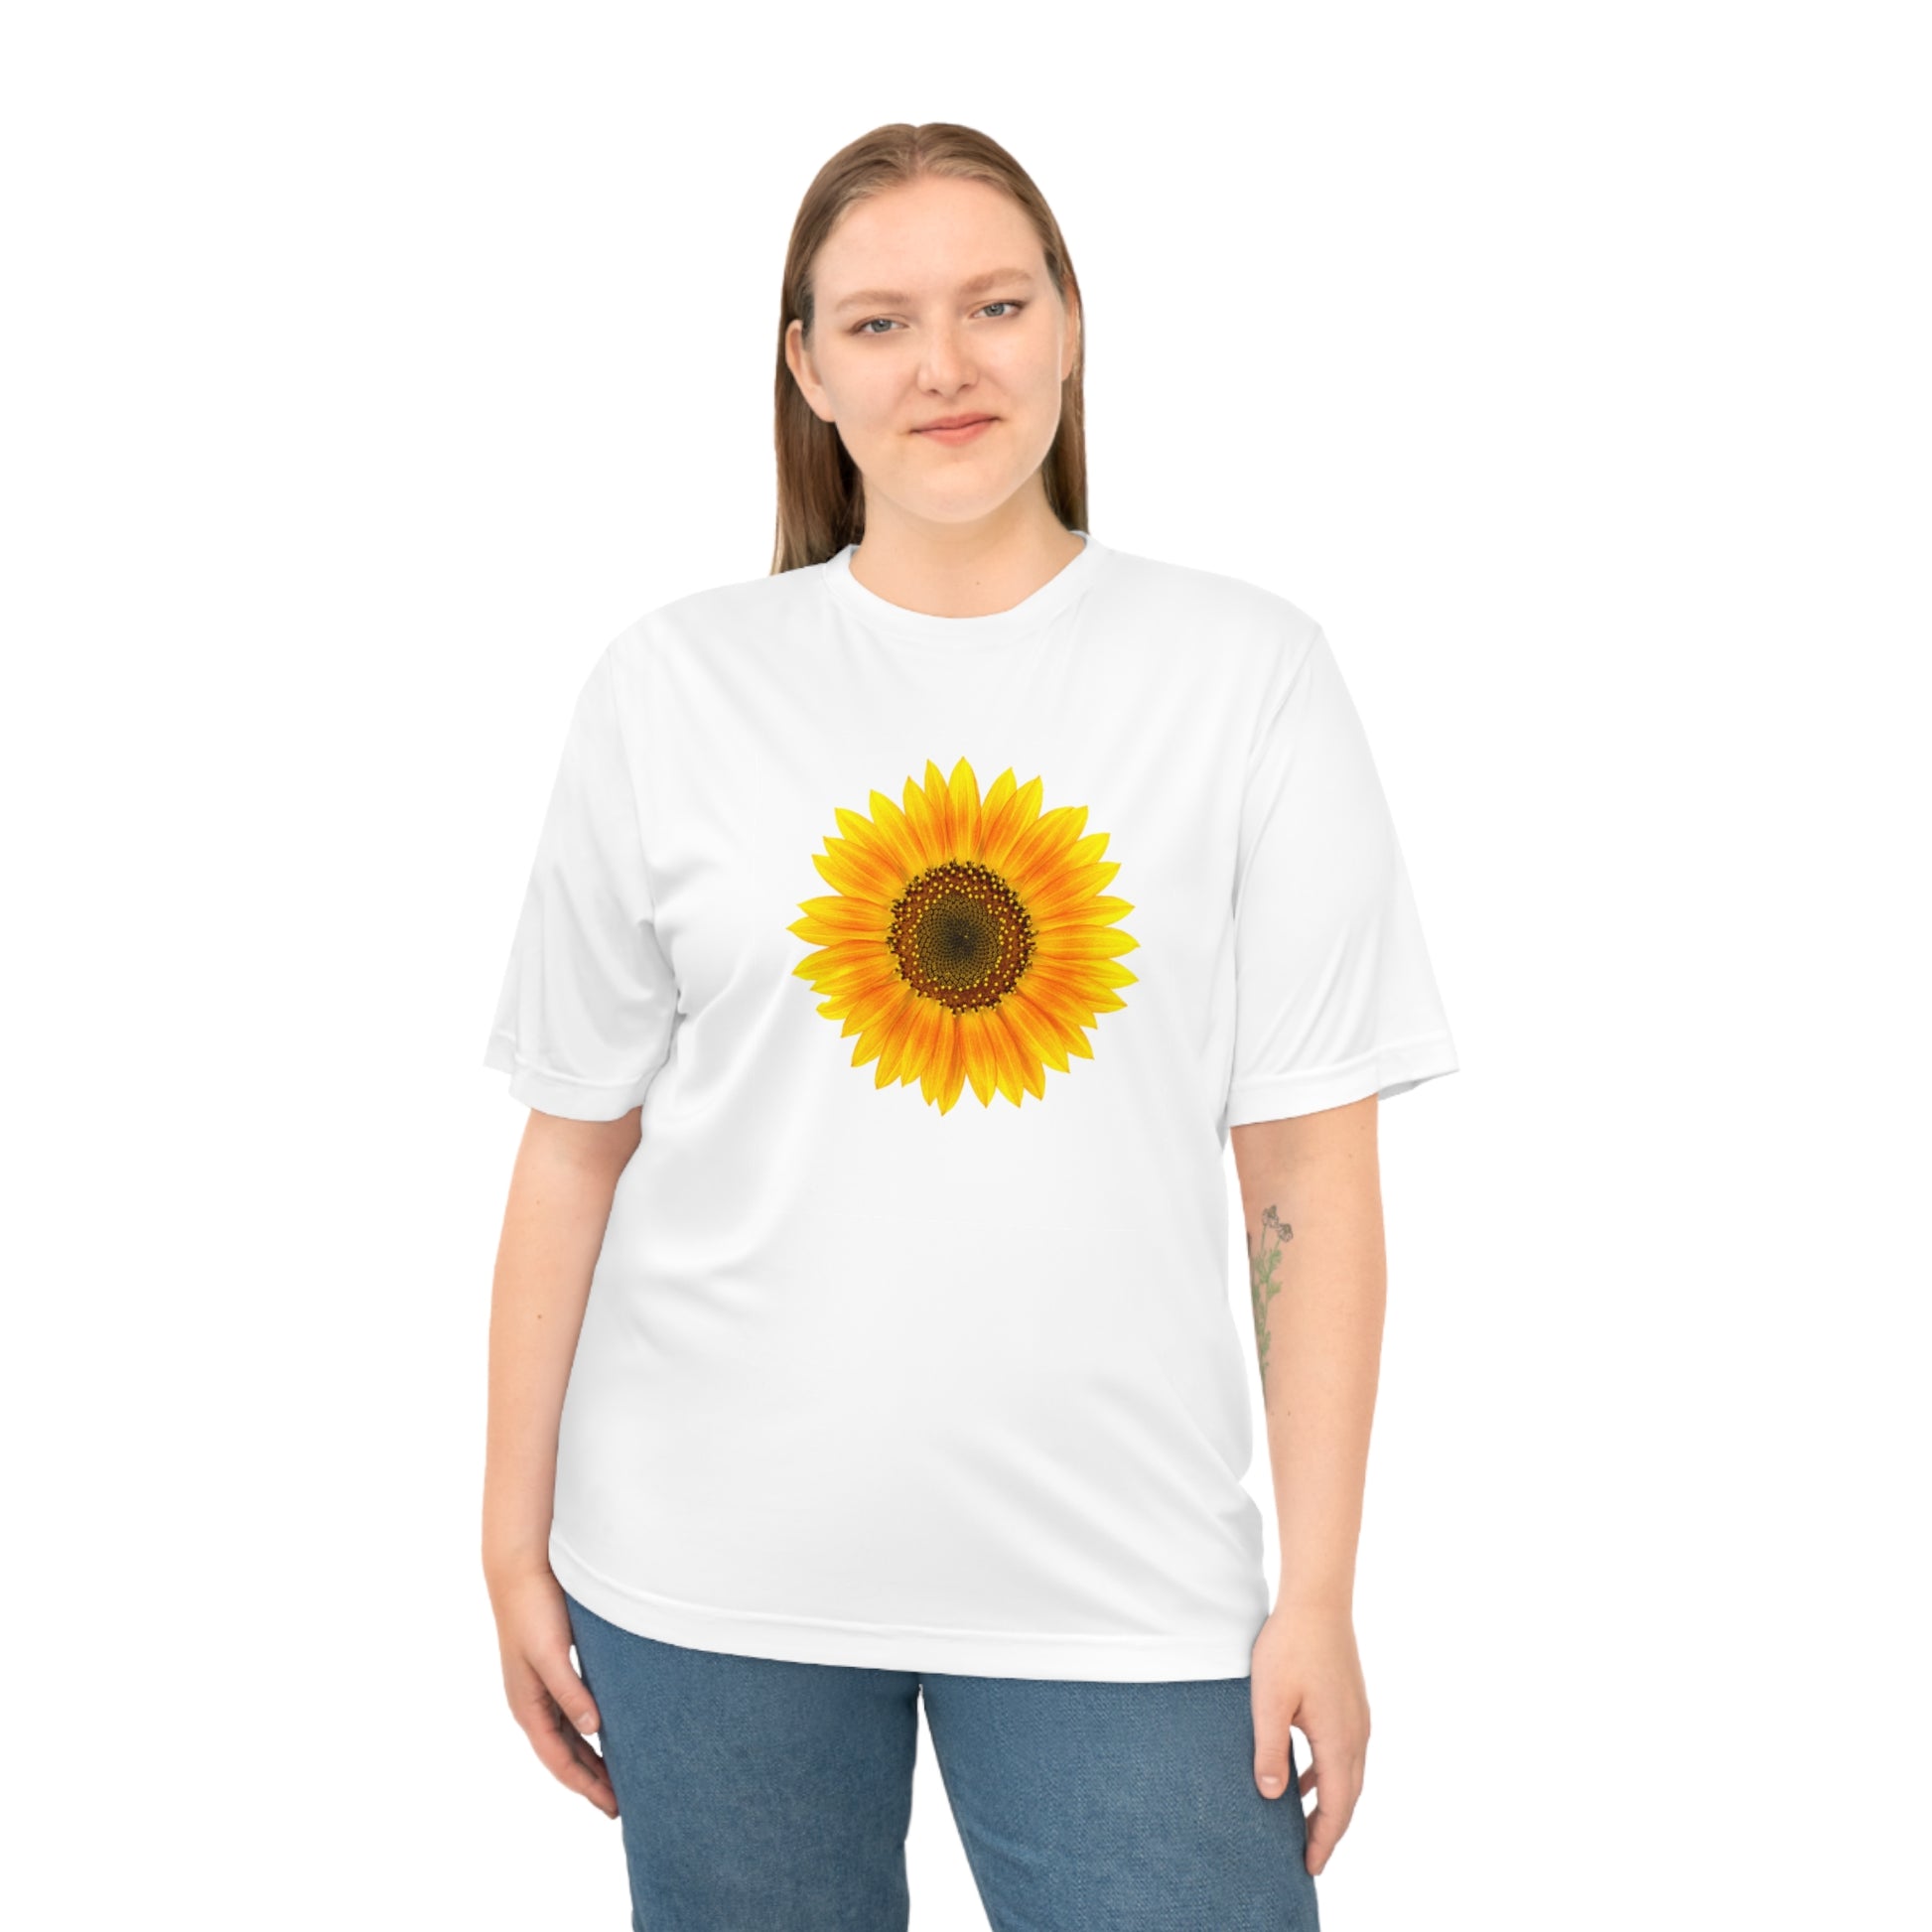 Mock up of a woman wearing the White shirt